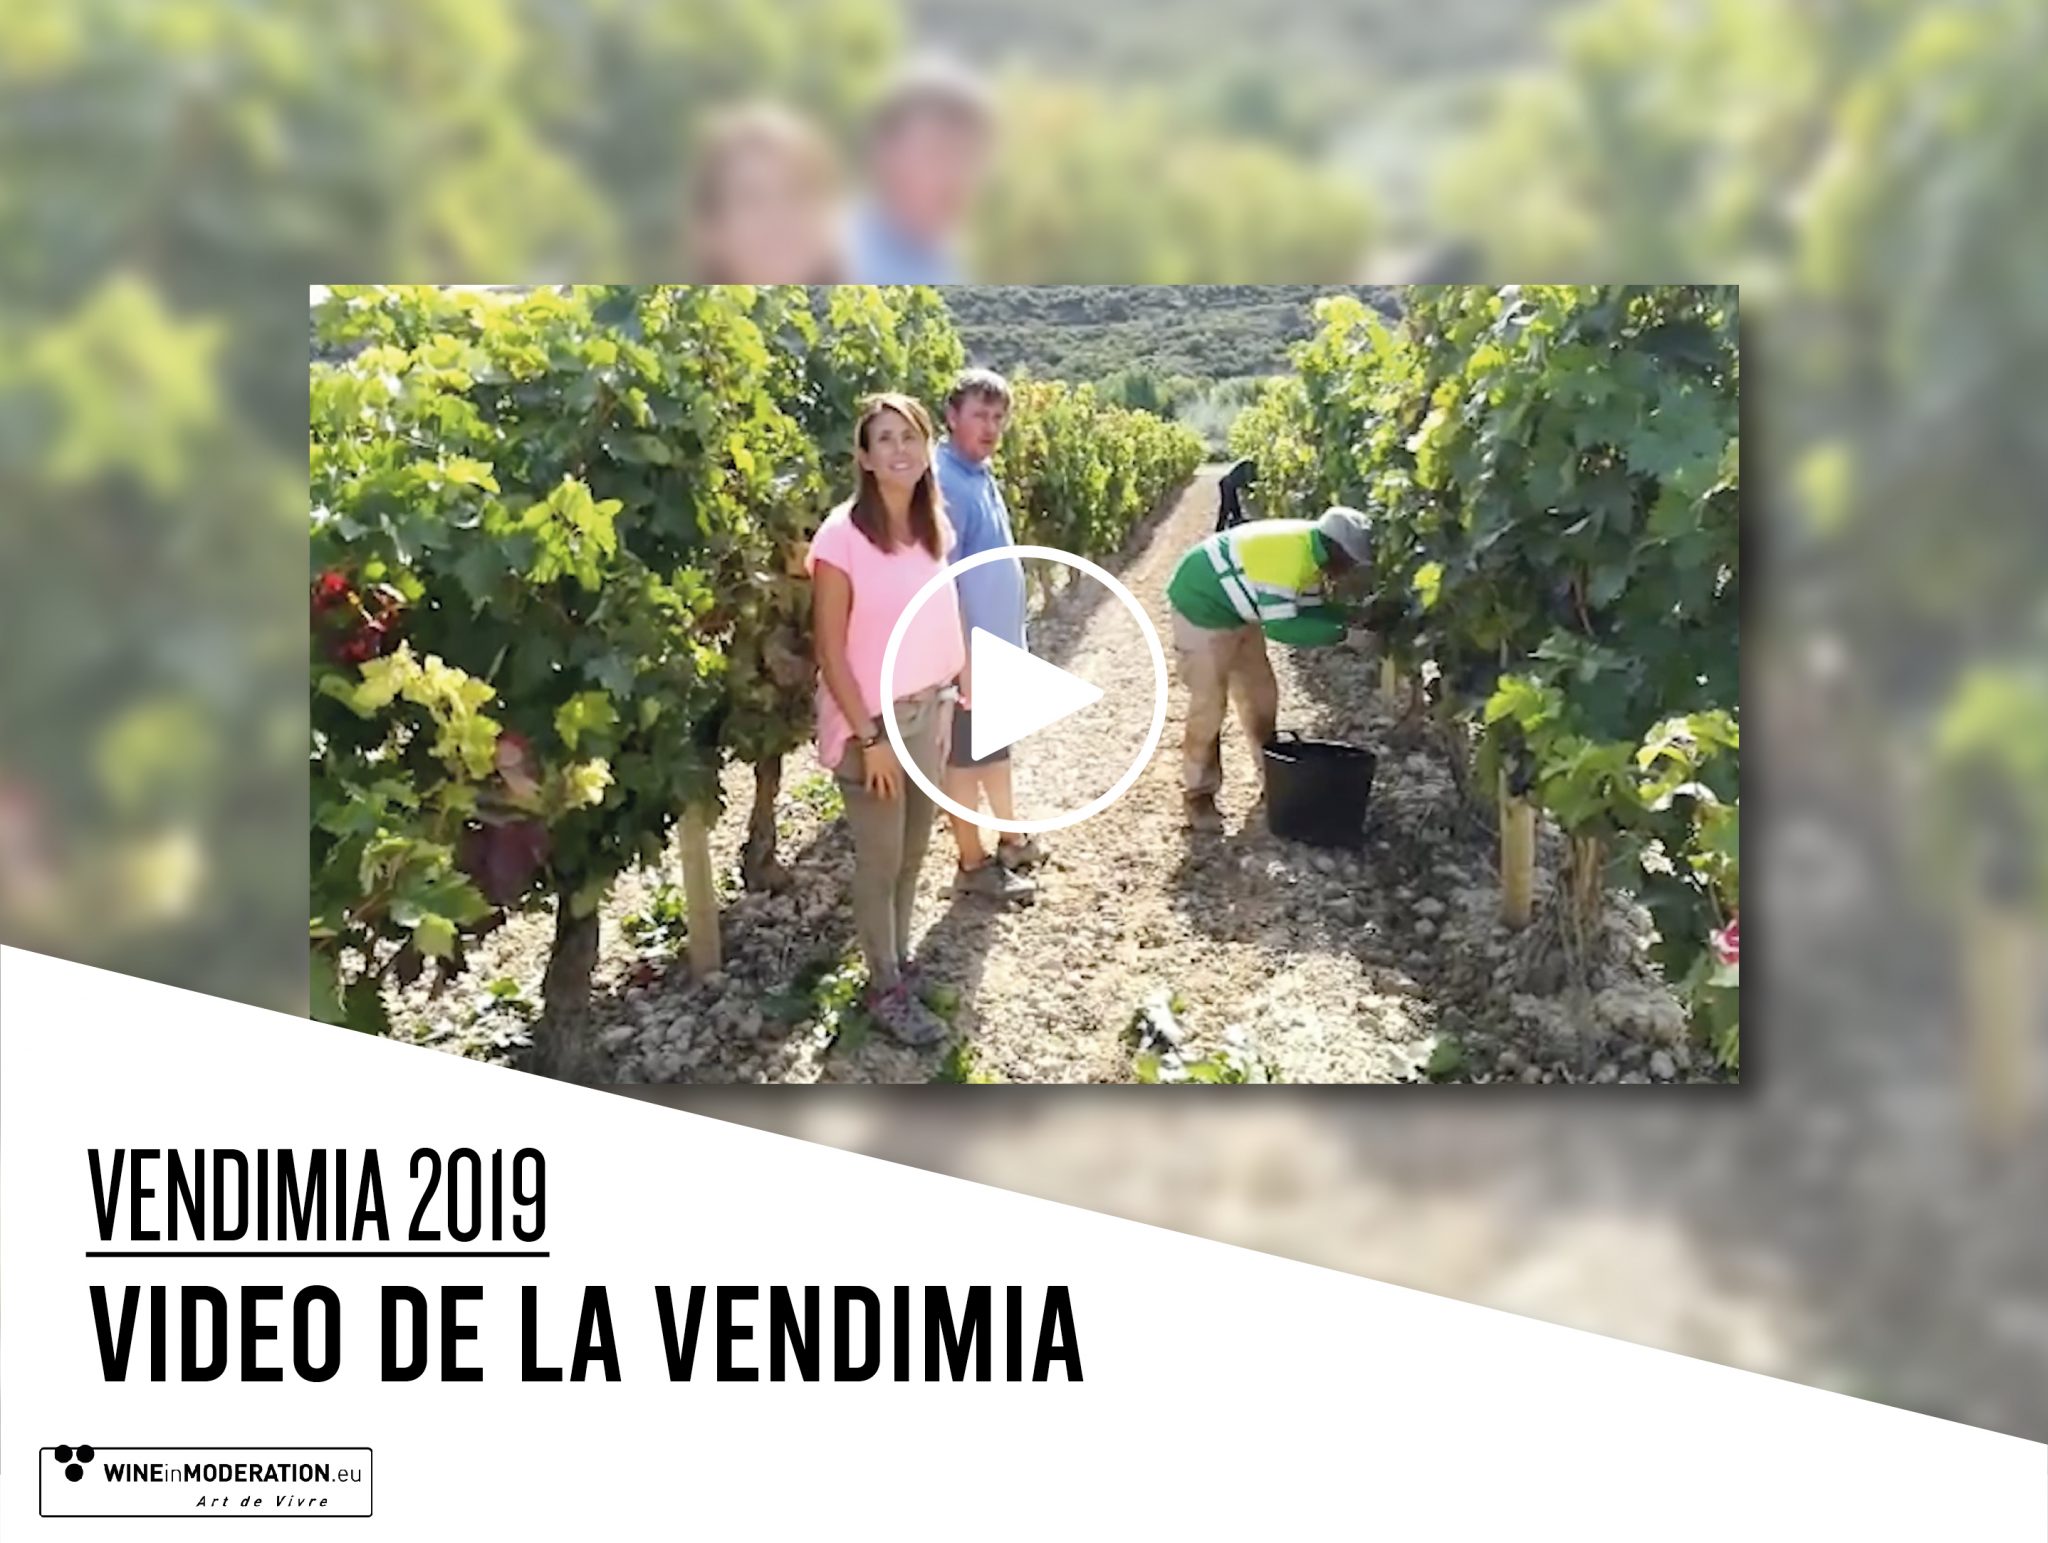 Harvest 2019 has started in Rioja